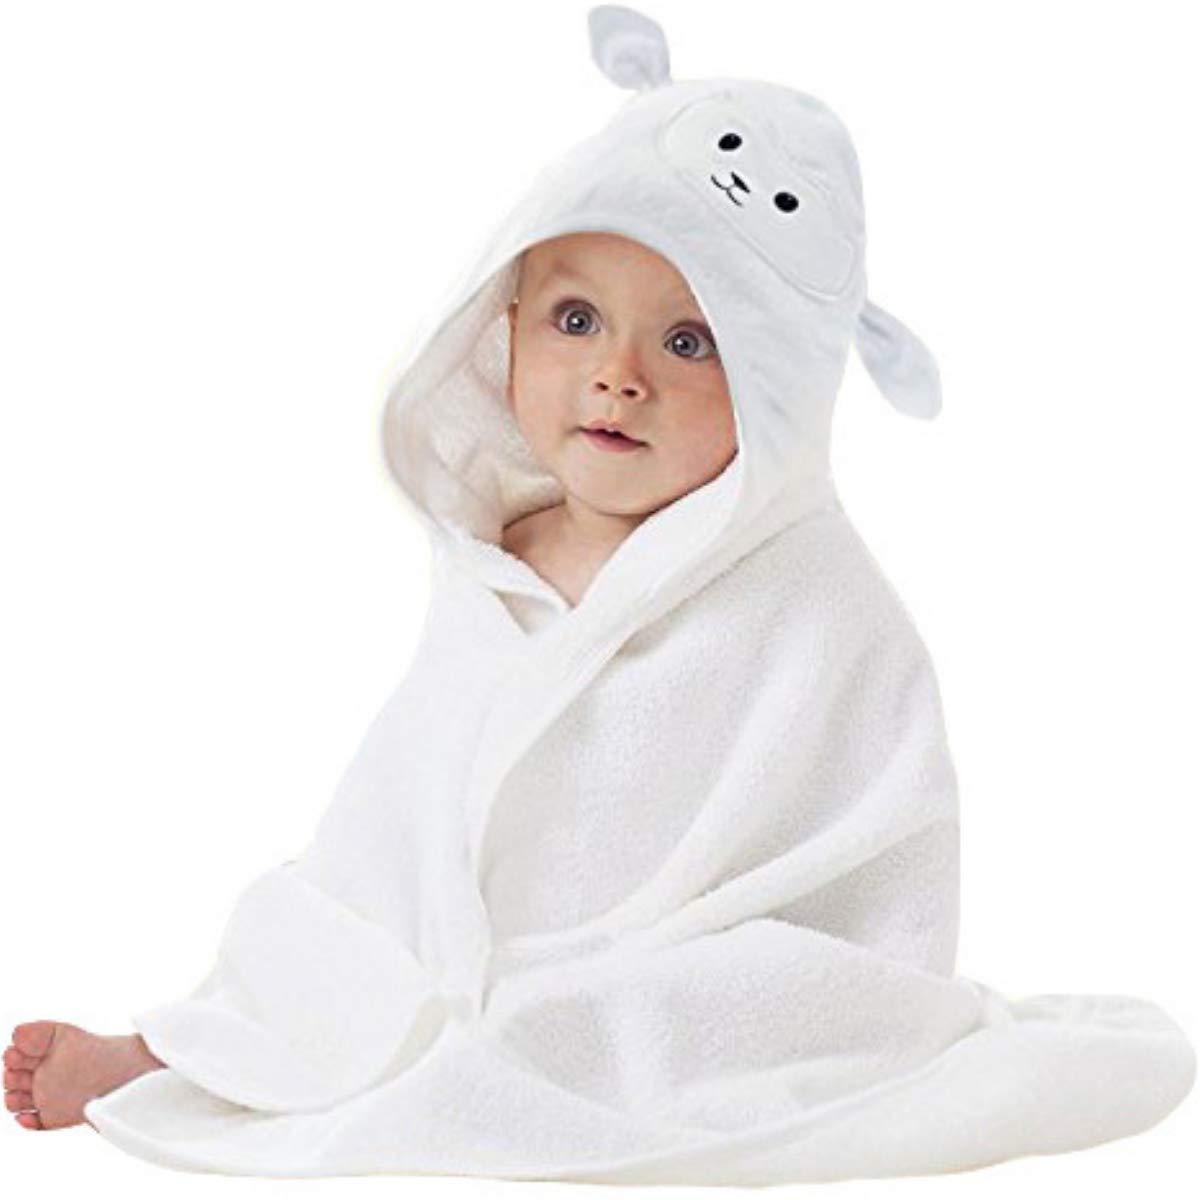 Discountable price Gym Towel With Pocket - Luxury New Design Wholesale Bath Towels bamboo fiber Quick-Dry Kids Hooded For Children Towel BT1 – Honest